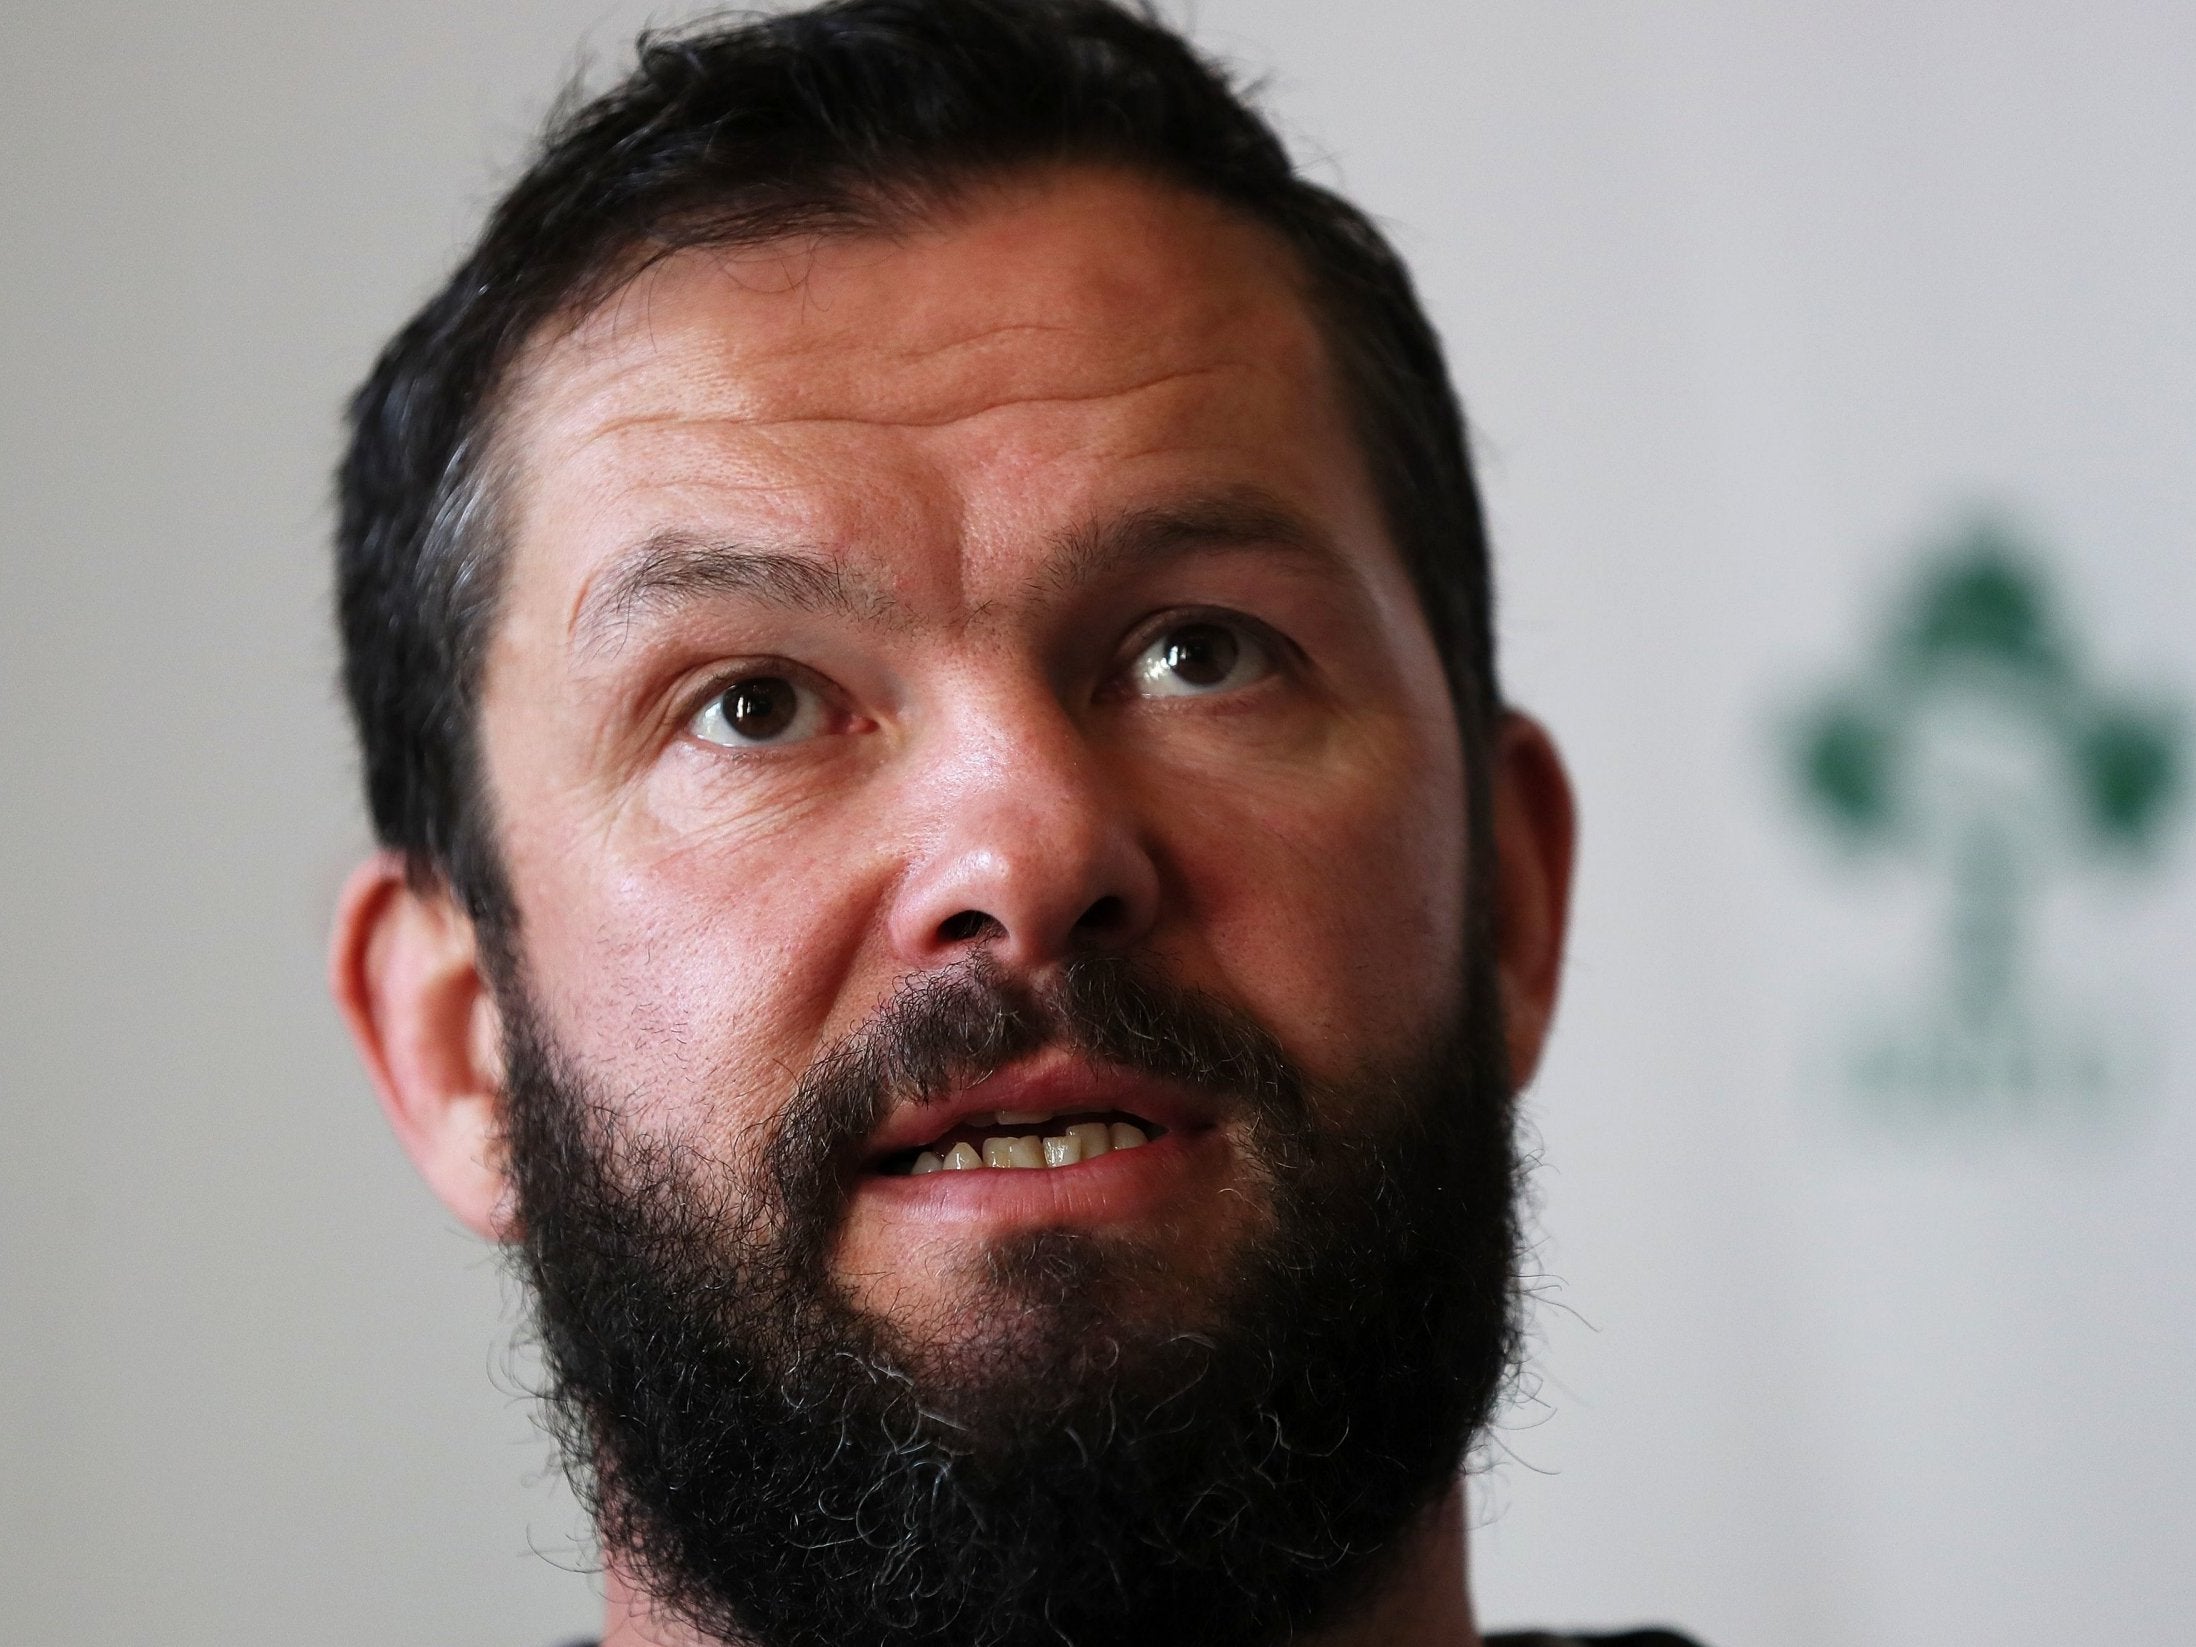 Andy Farrell will replace Joe Schmidt as Ireland head coach following the 2019 Rugby World Cup